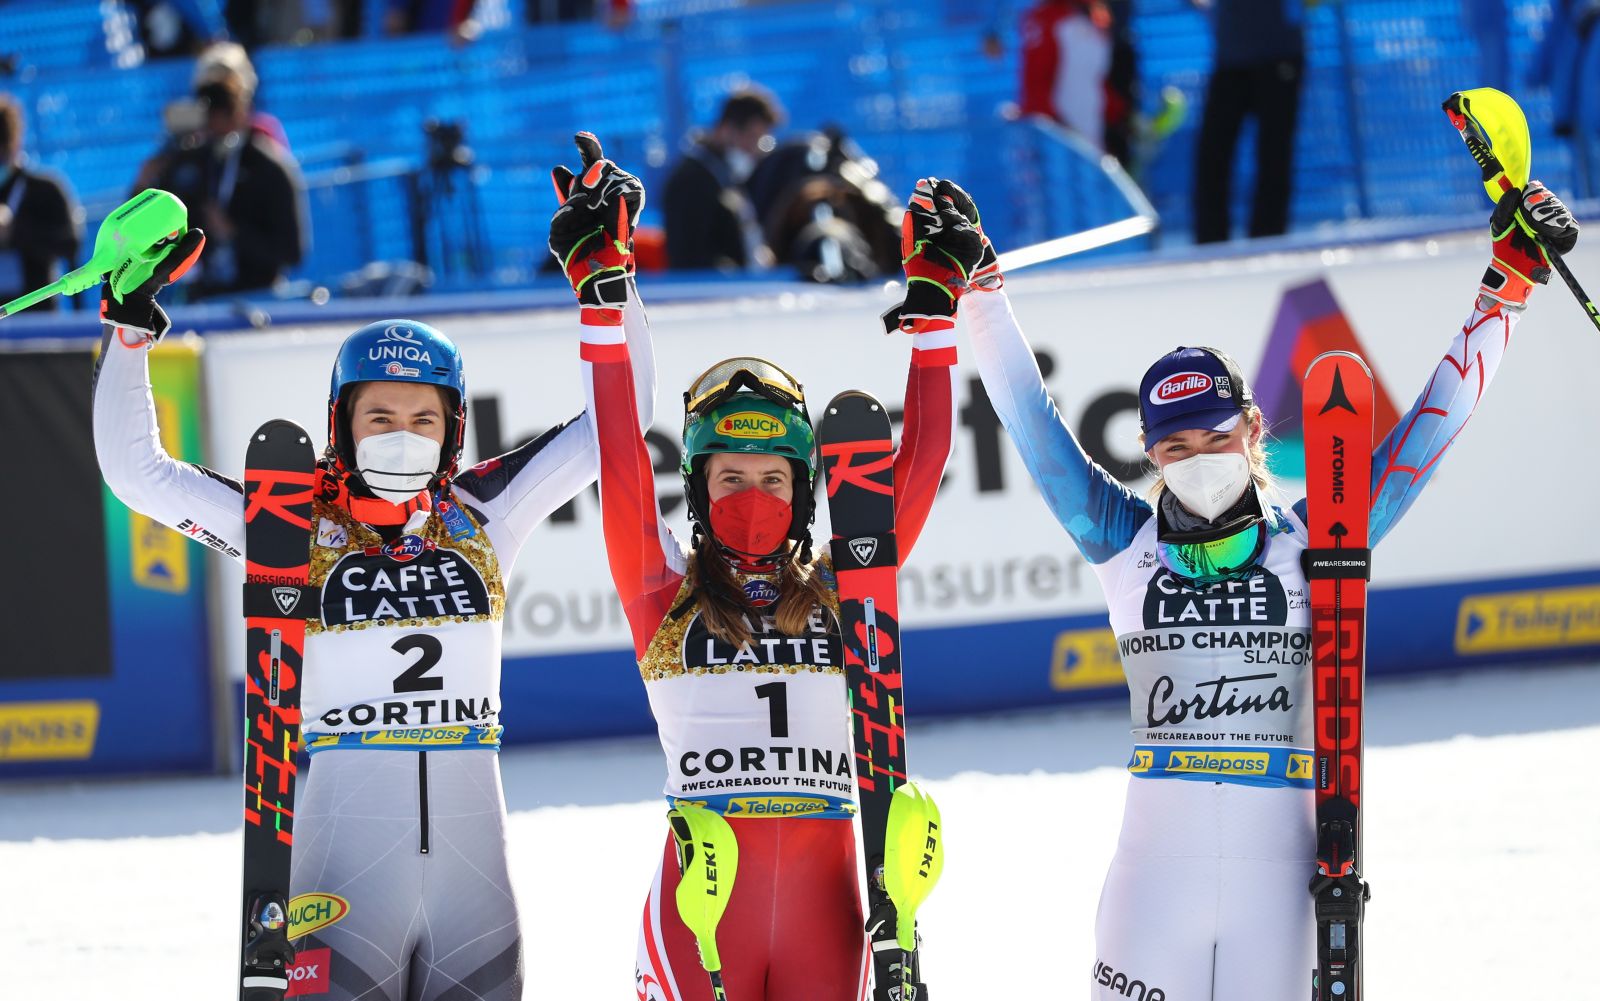 epa09025857 (L-R) Second placed Petra Vlhova of Slovakia, winner Katharina Liensberger of Austria and third placed Mikaela Shiffrin of the USA celebrate during the Women's Slalom race at the FIS Alpine Skiing World Championships in Cortina d'Ampezzo, Italy, 20 February 2021.  EPA/ANDREA SOLERO